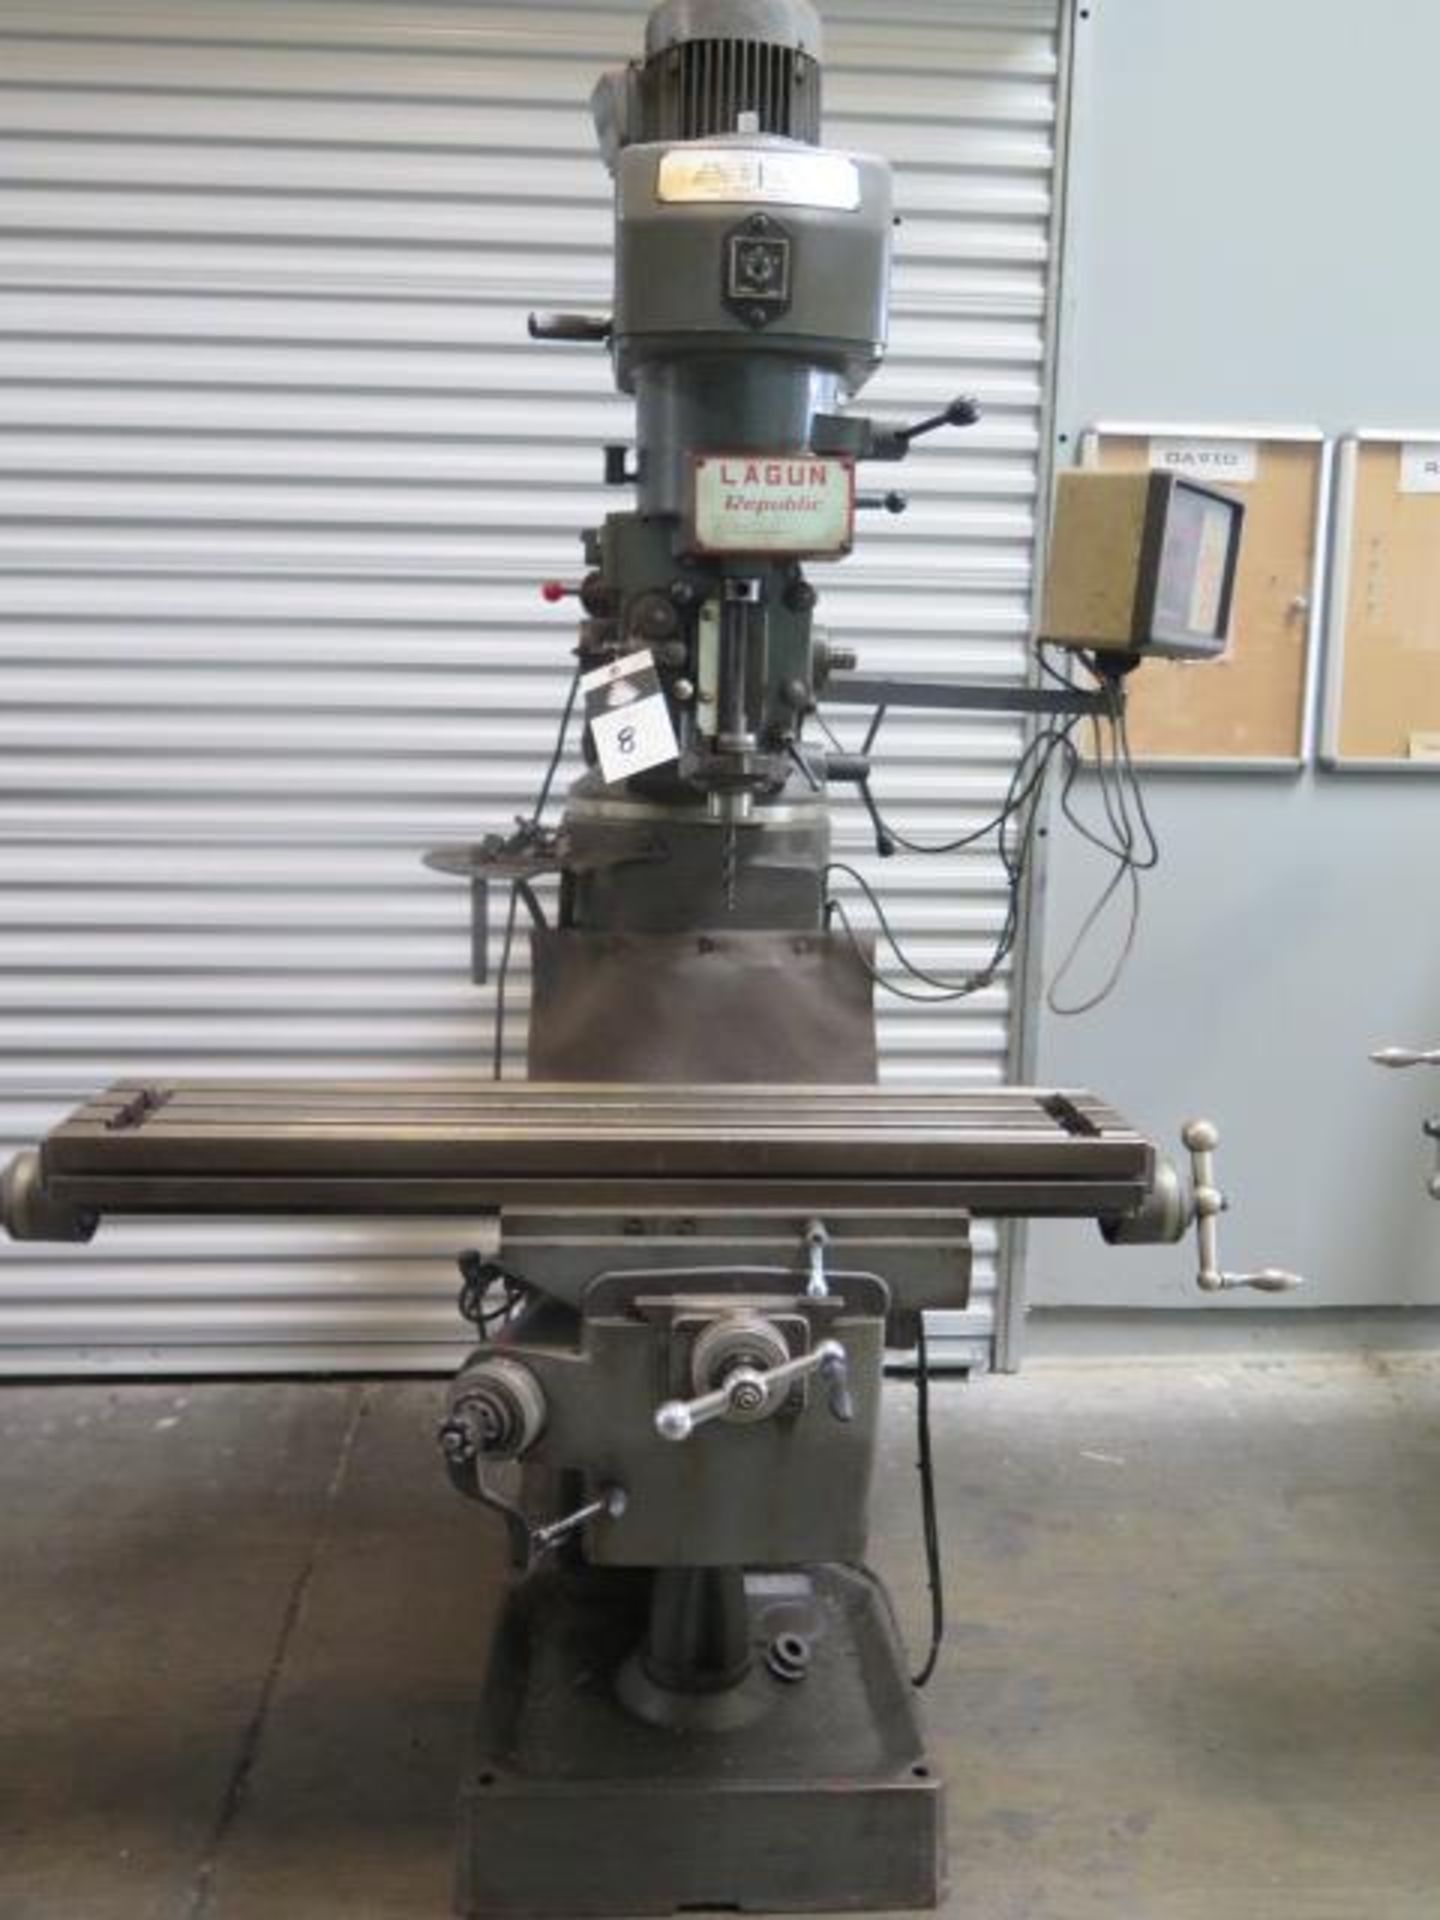 Lagun FT-1 Vertical Mill w/ Anilam Wizard DRO, 55-2940 RPM, 8-Speeds, 9” x 42” Table SOLD AS-IS